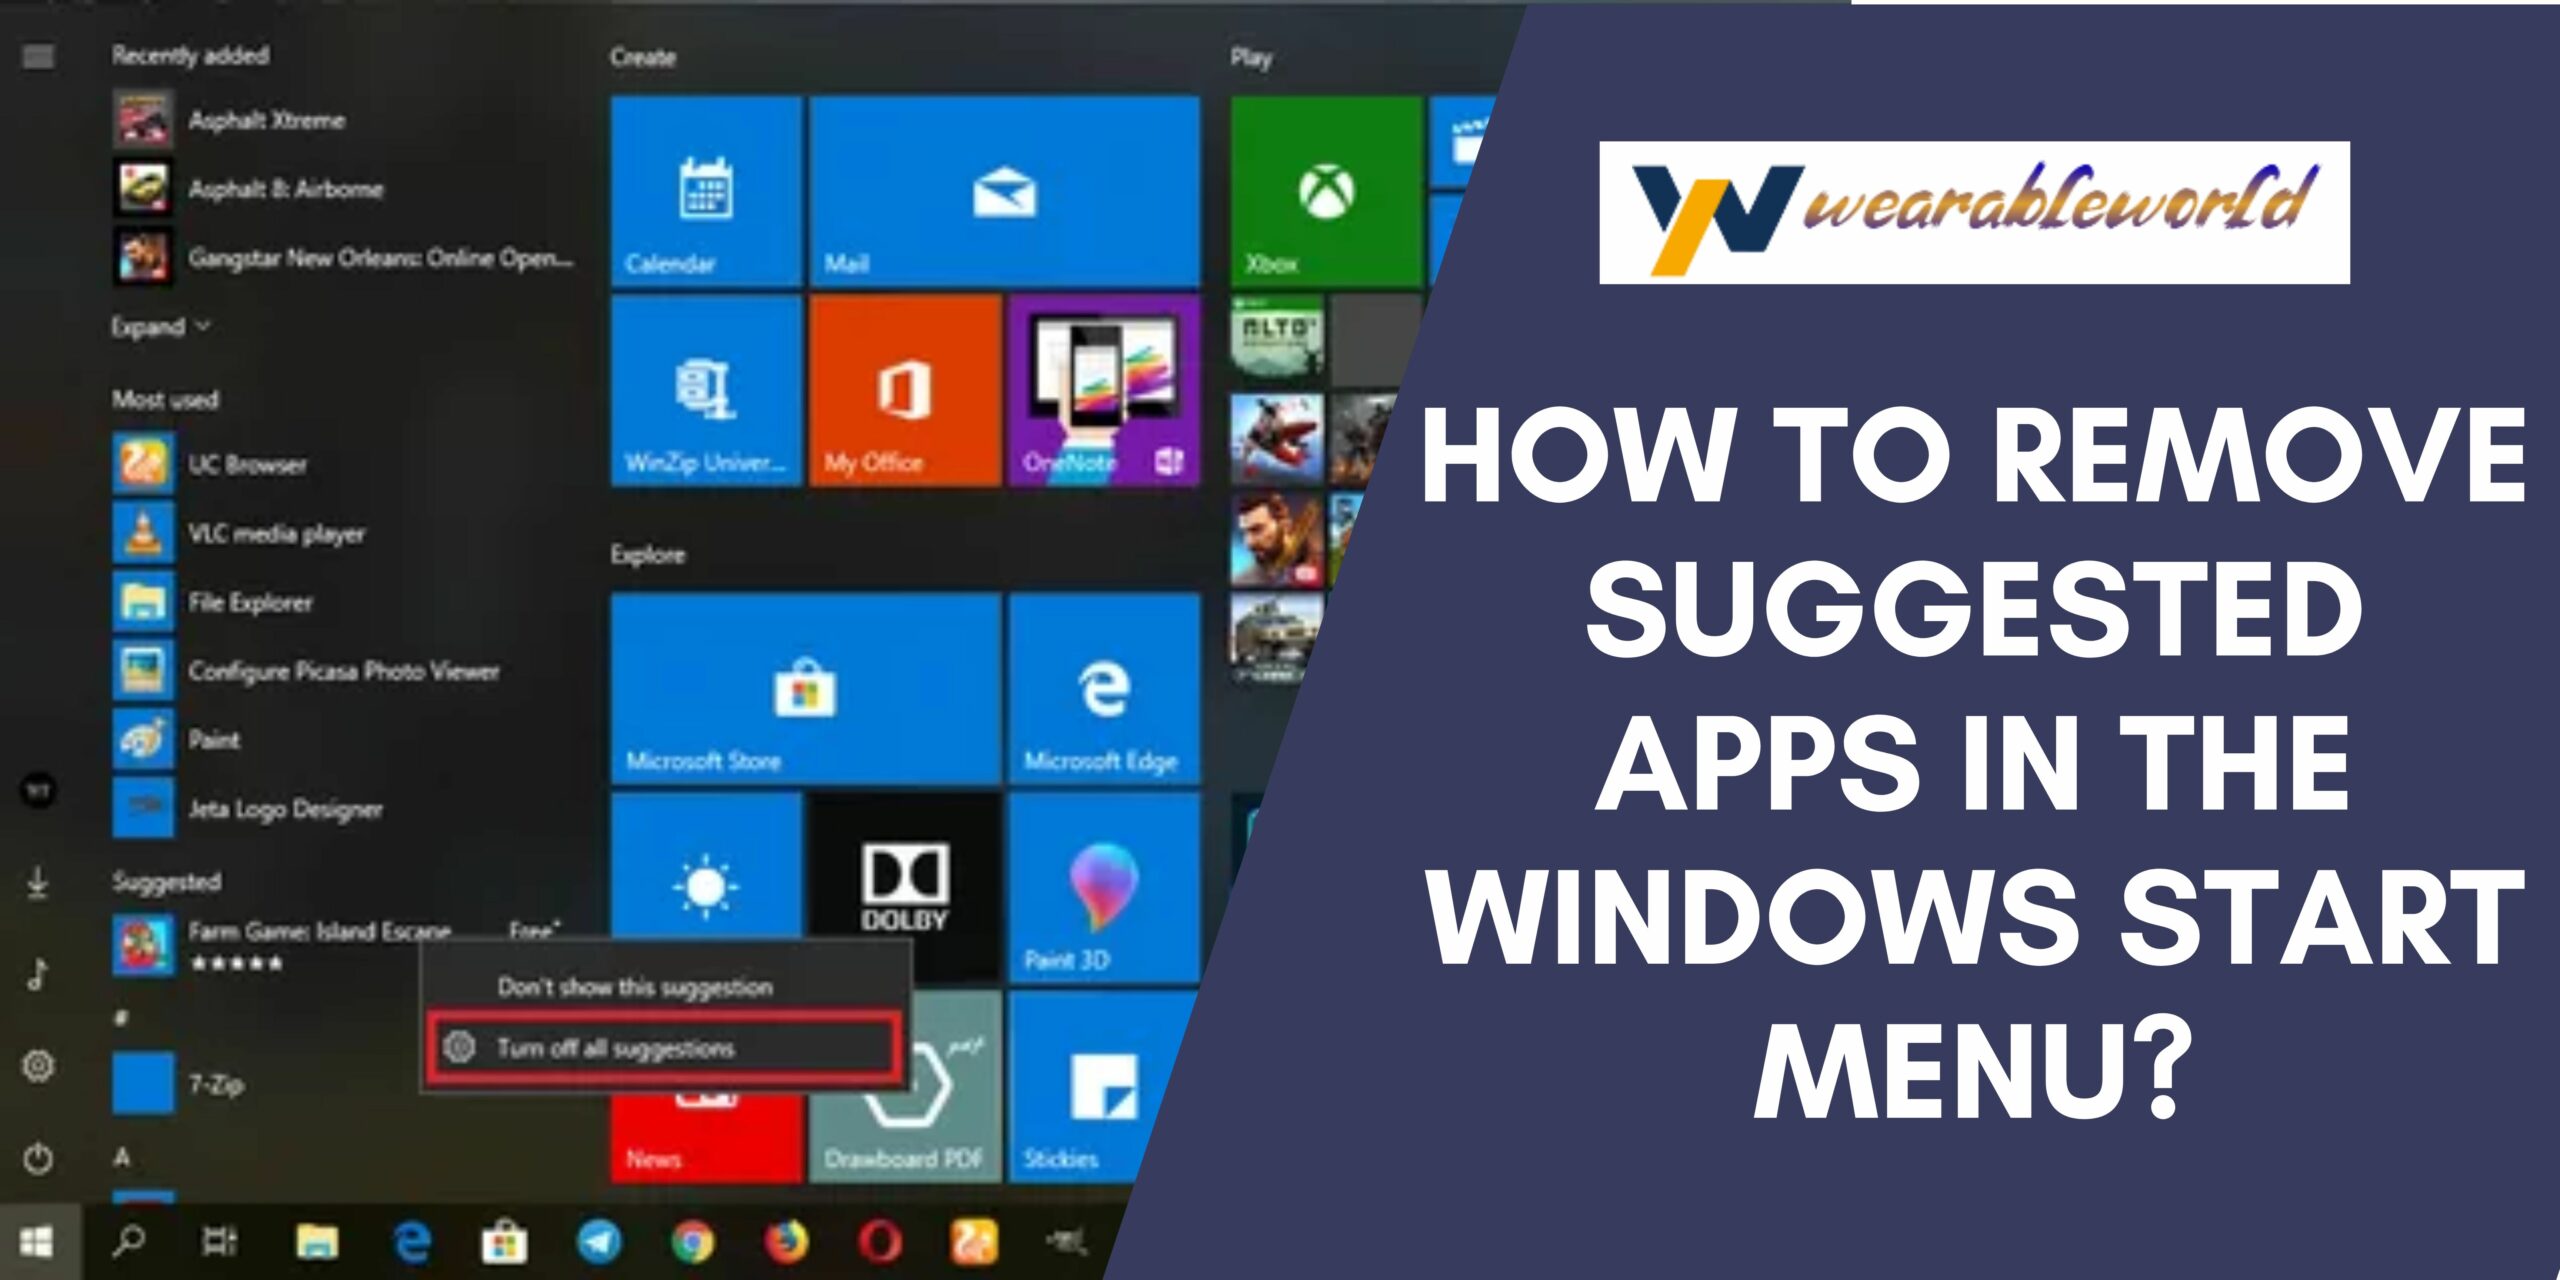 Remove suggested apps in the Windows Start menu